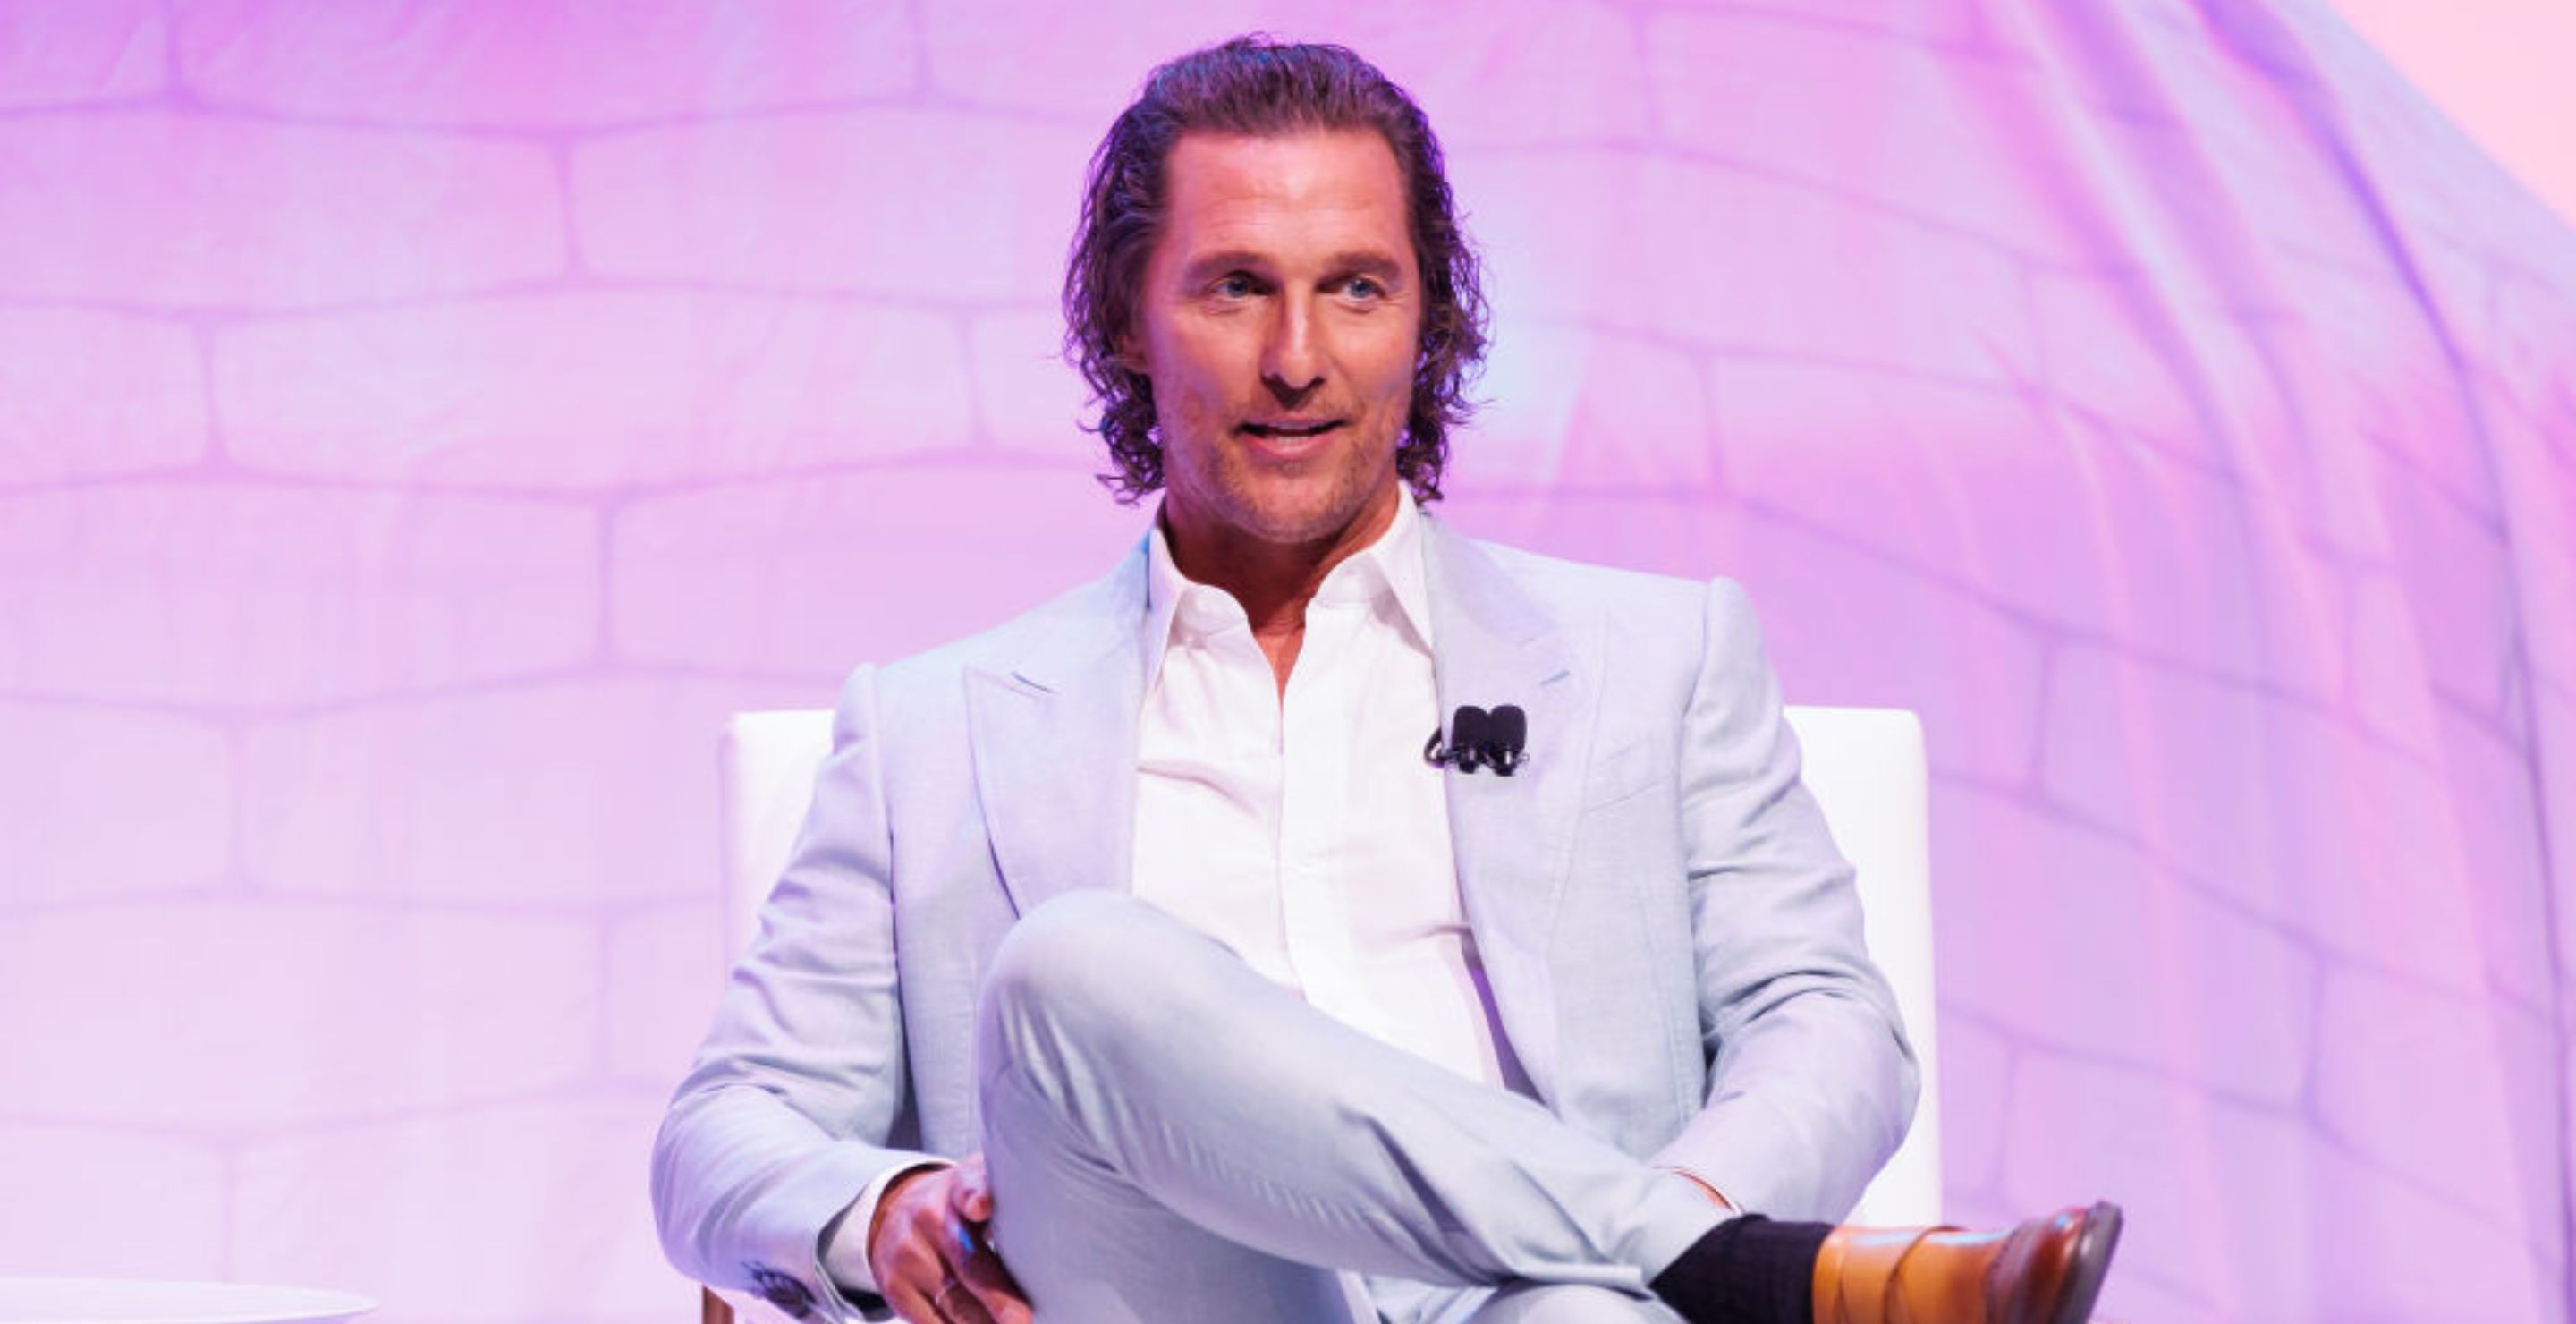 Matthew McConaughey Embraces His Inner Cowboy in Anniversary Pic